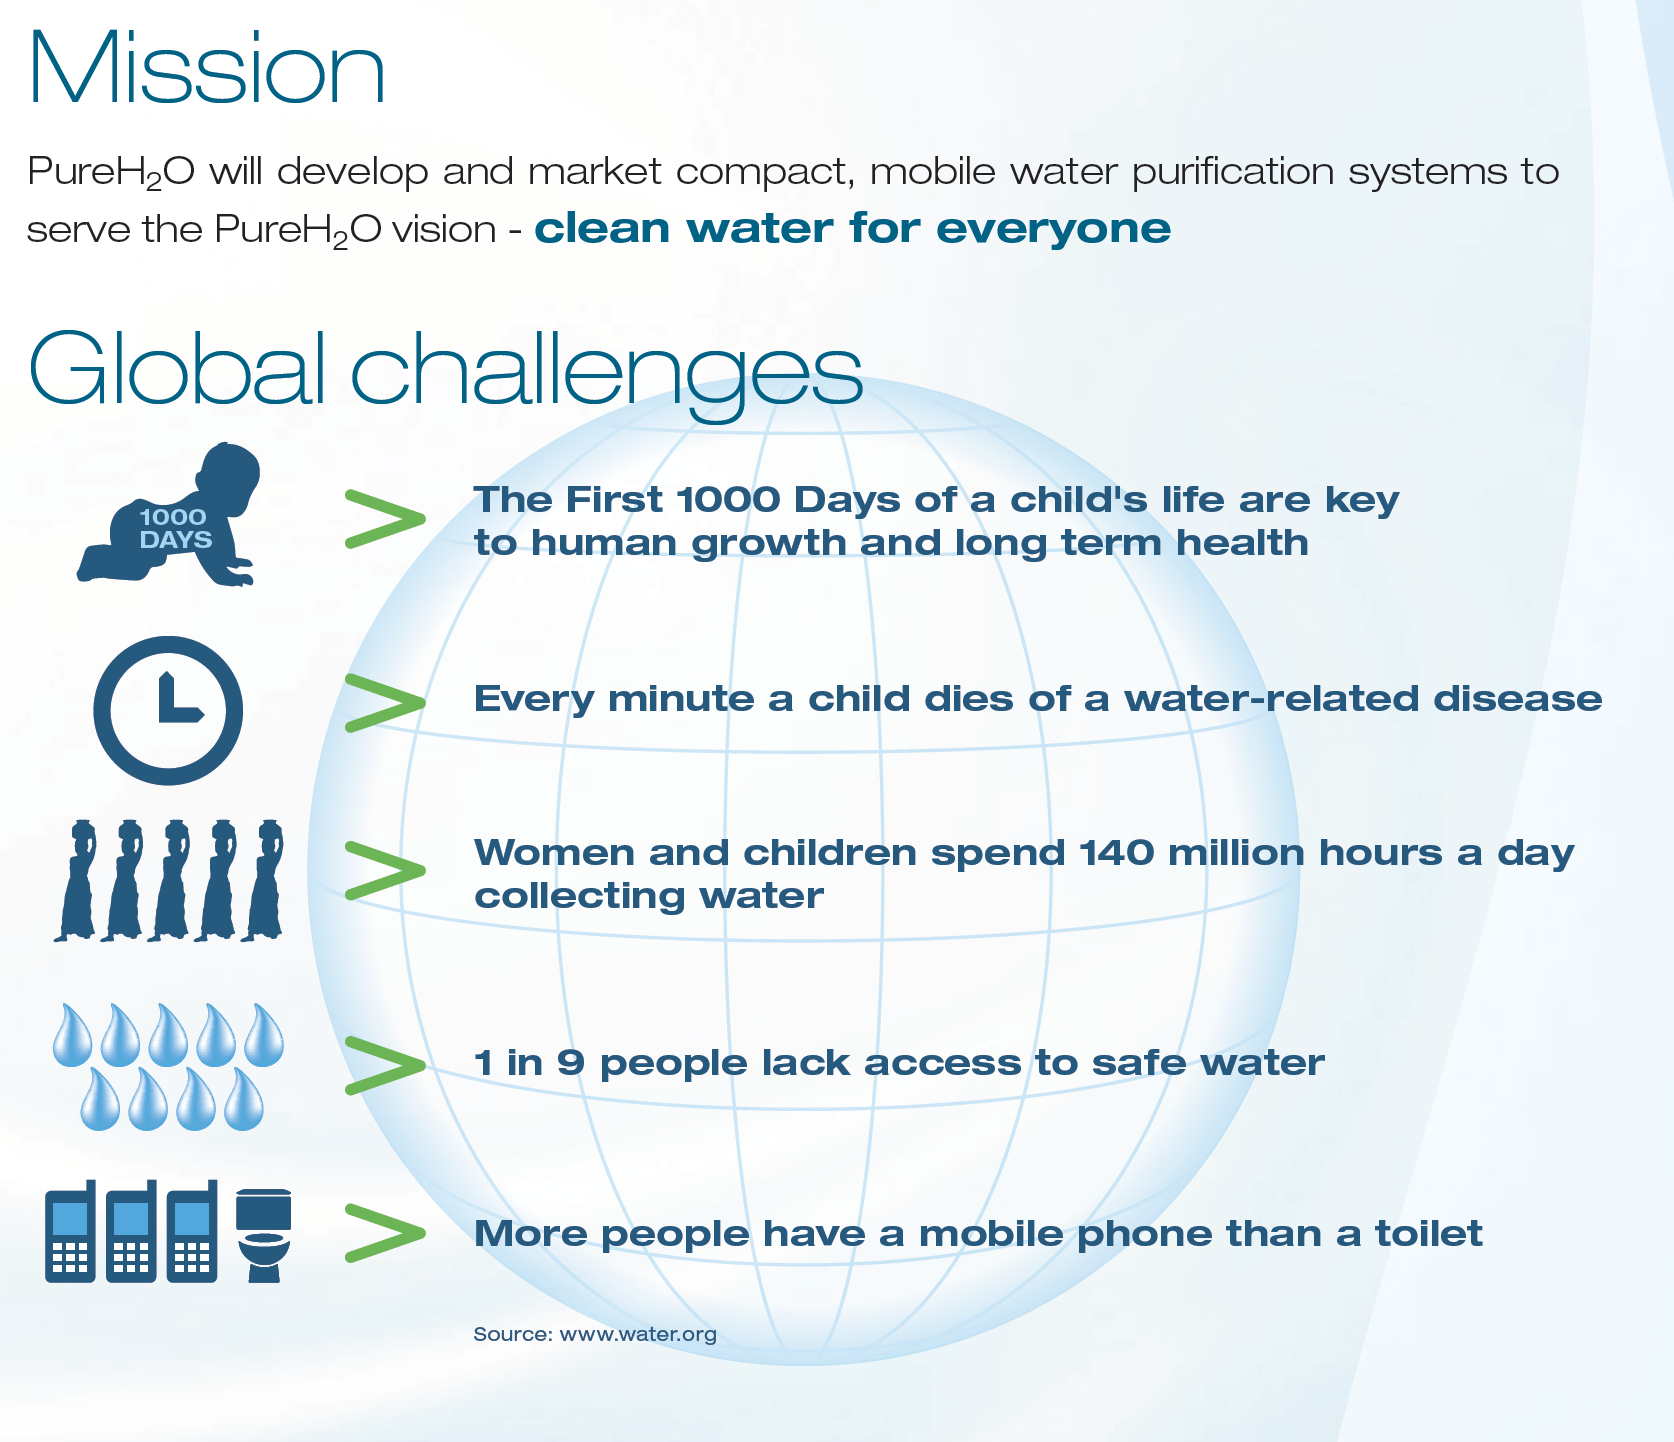 &nbsp; &nbsp; PureH2O solutions are capable of delivering clean and safe drinking water to any Hospital&nbsp; &bull; The BlueBox solutions are b...